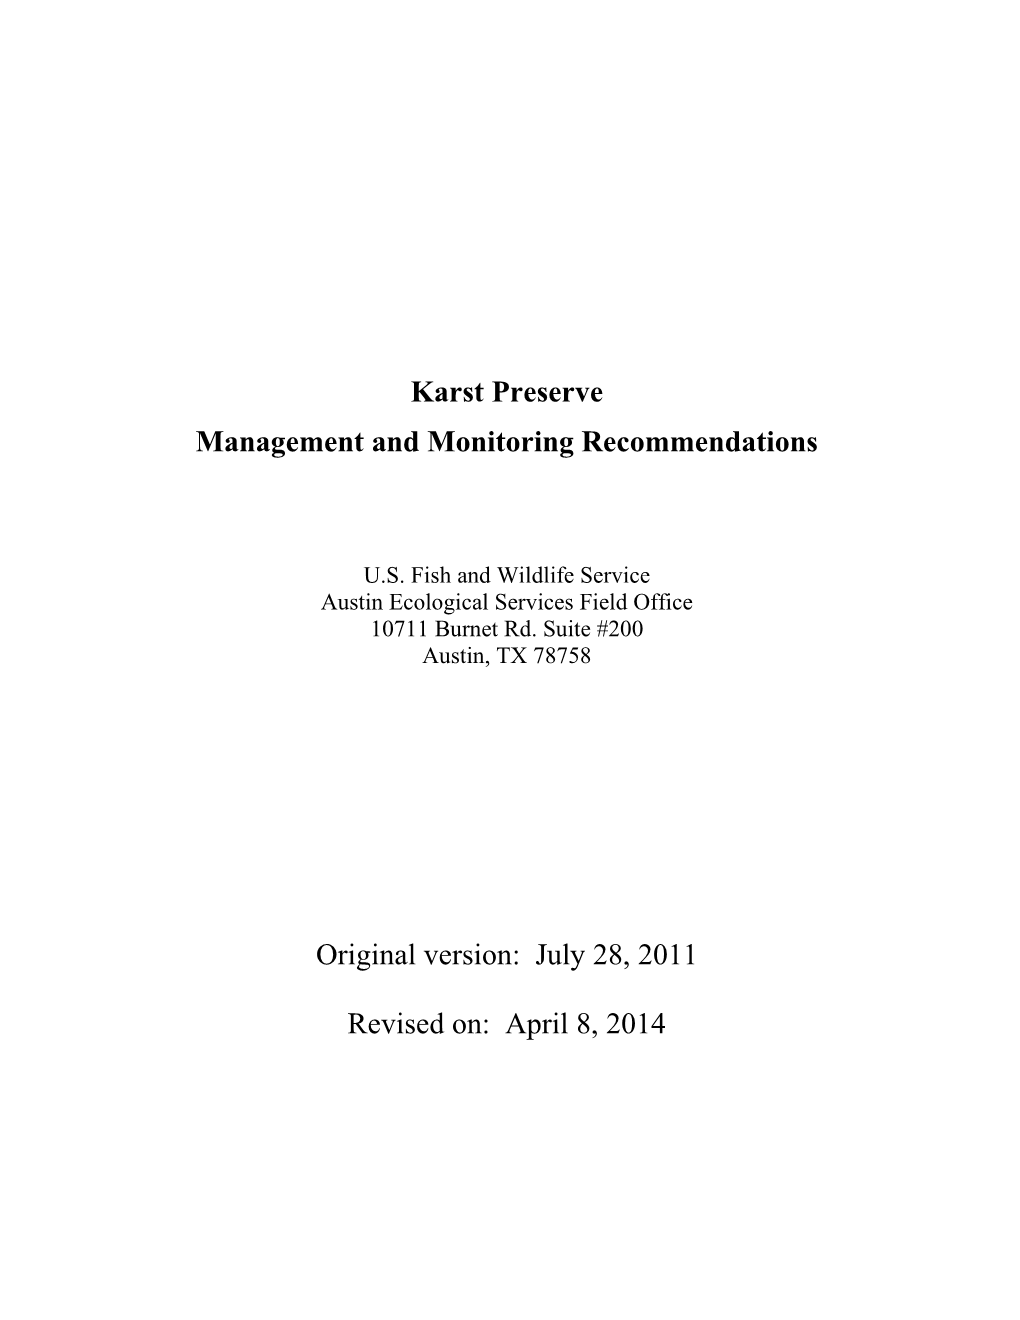 Karst Preserve Management and Monitoring Recommendations